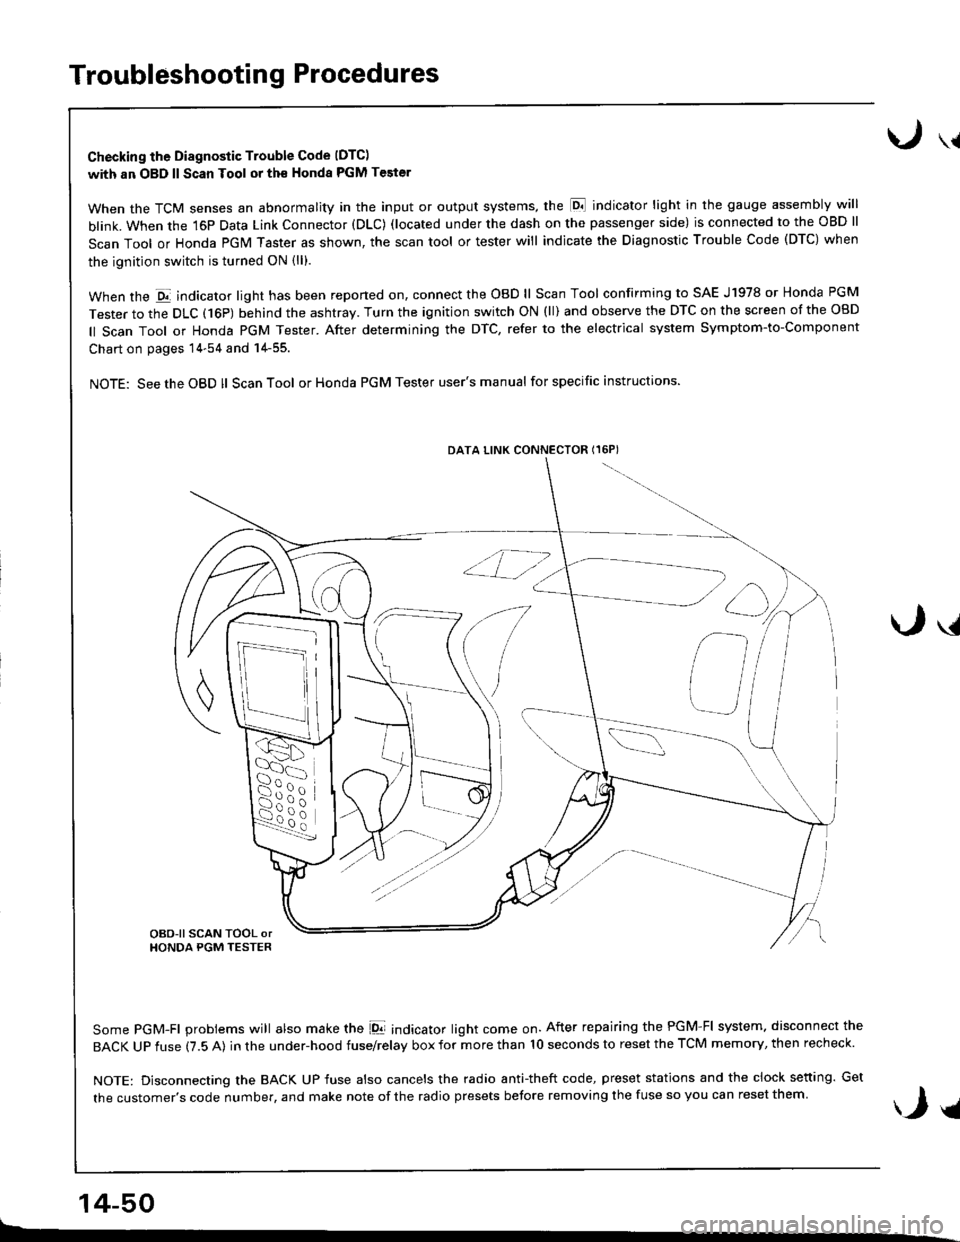 ACURA INTEGRA 1998  Service Repair Manual Troubleshooting Procedures
Checking the Diagnostic Trouble Code (DTC)
with an OBD ll Scan Tool or th€ Honda PGM Tester
When the TCM senses an abnormality in the input or output systems, the lD,] ind